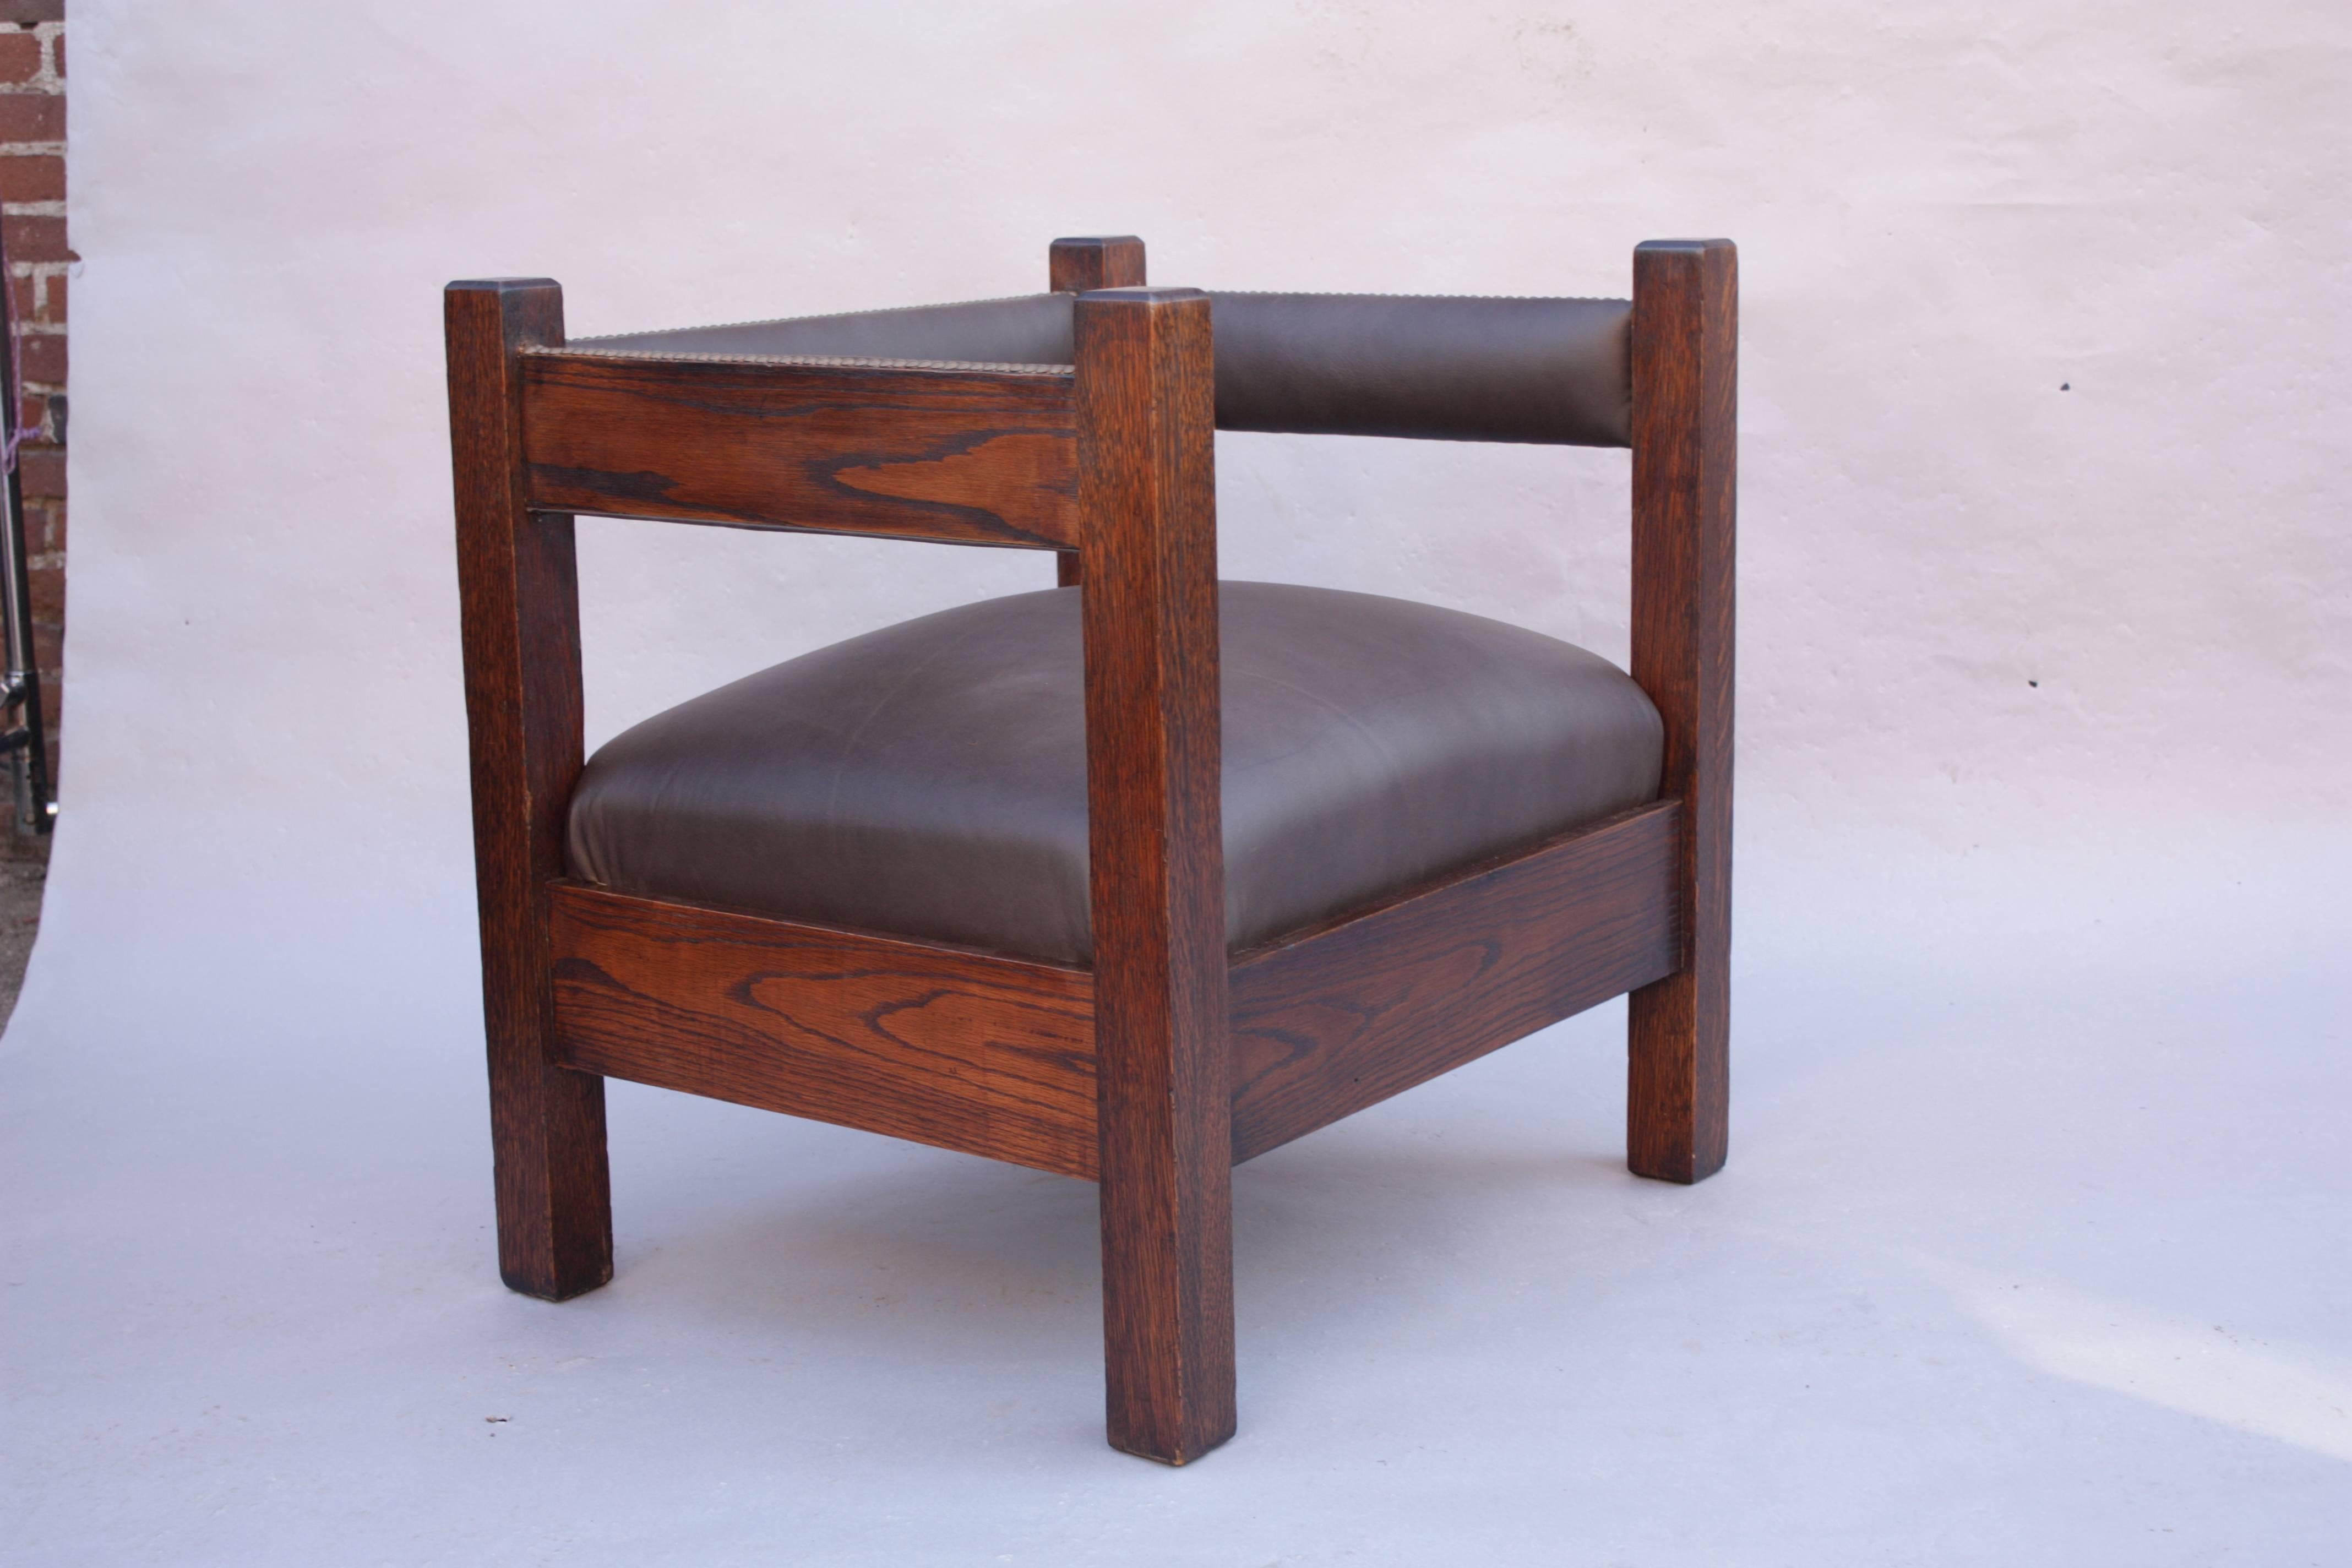 Circa 1910 arts and crafts chair. New leather upholstery. 30.5